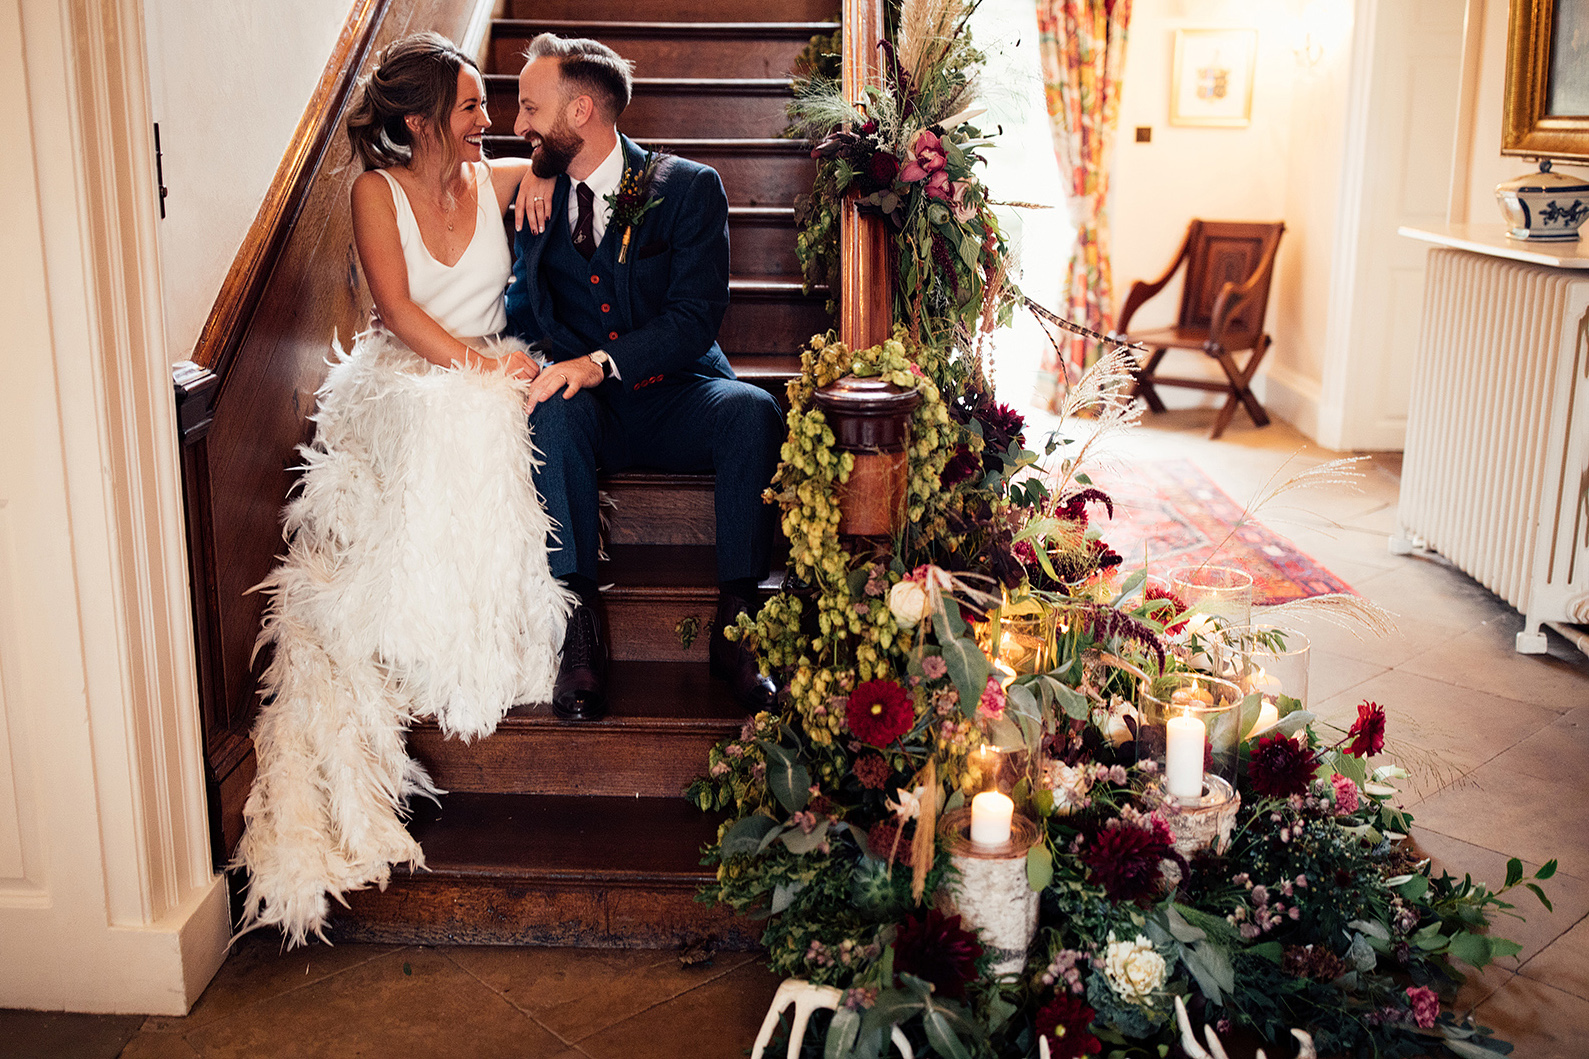 A bride and groom sit at the bottom of a set of antique wooden stairs surrounded by candles and Autumnal foliage